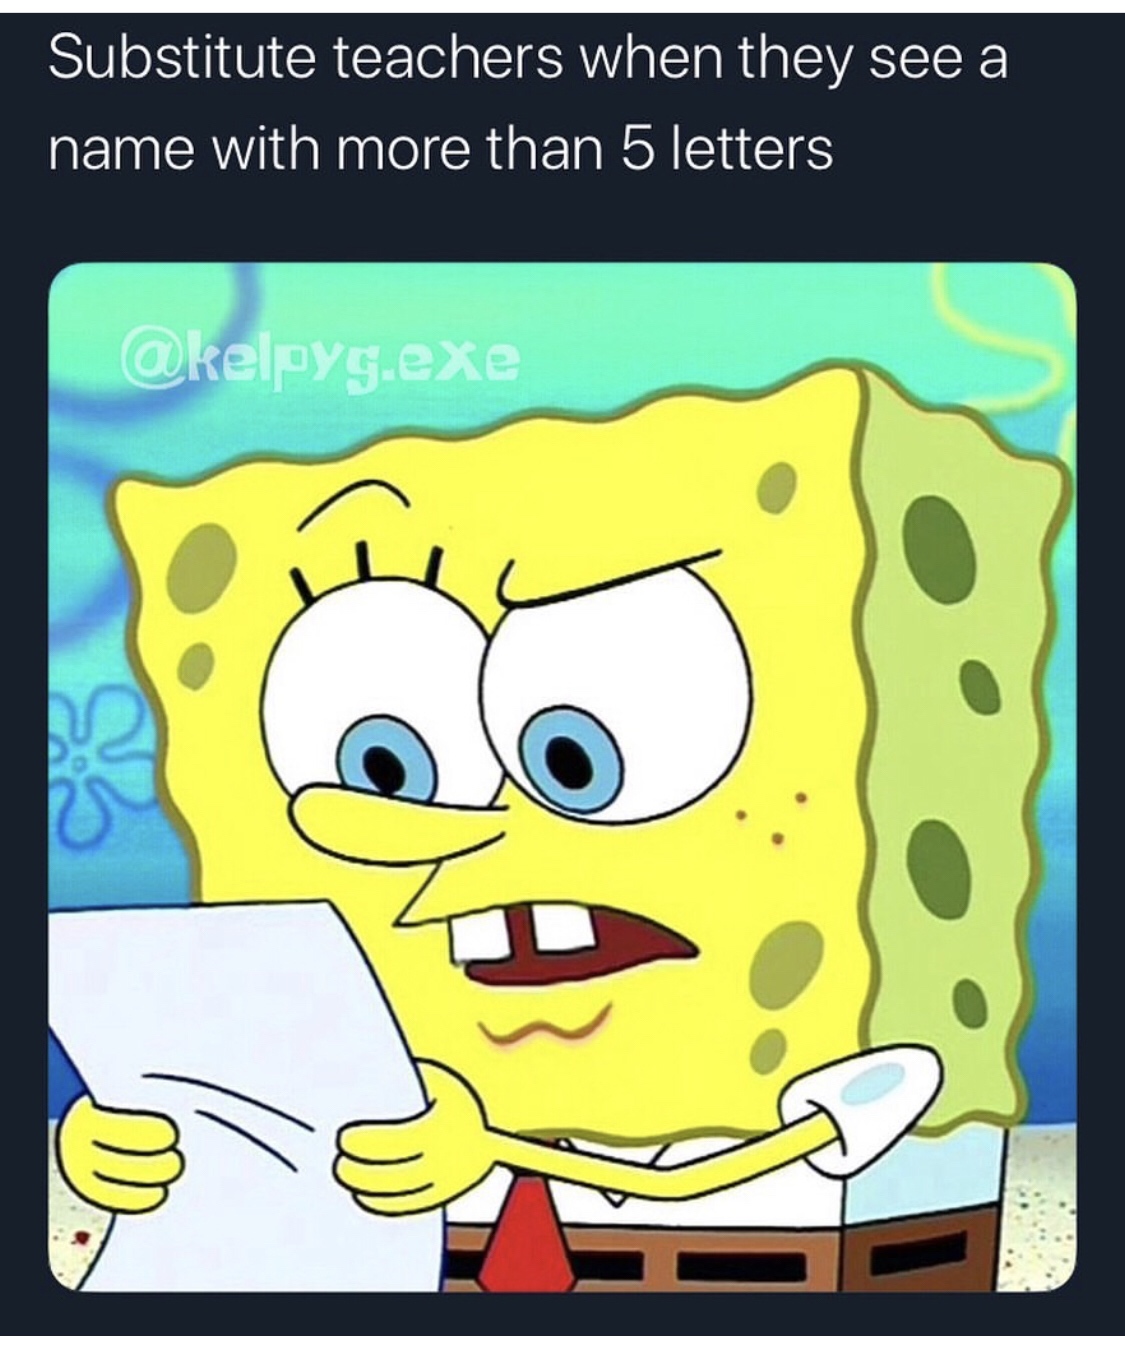 spongebob 4th wall - Substitute teachers when they see a name with more than 5 letters .exe